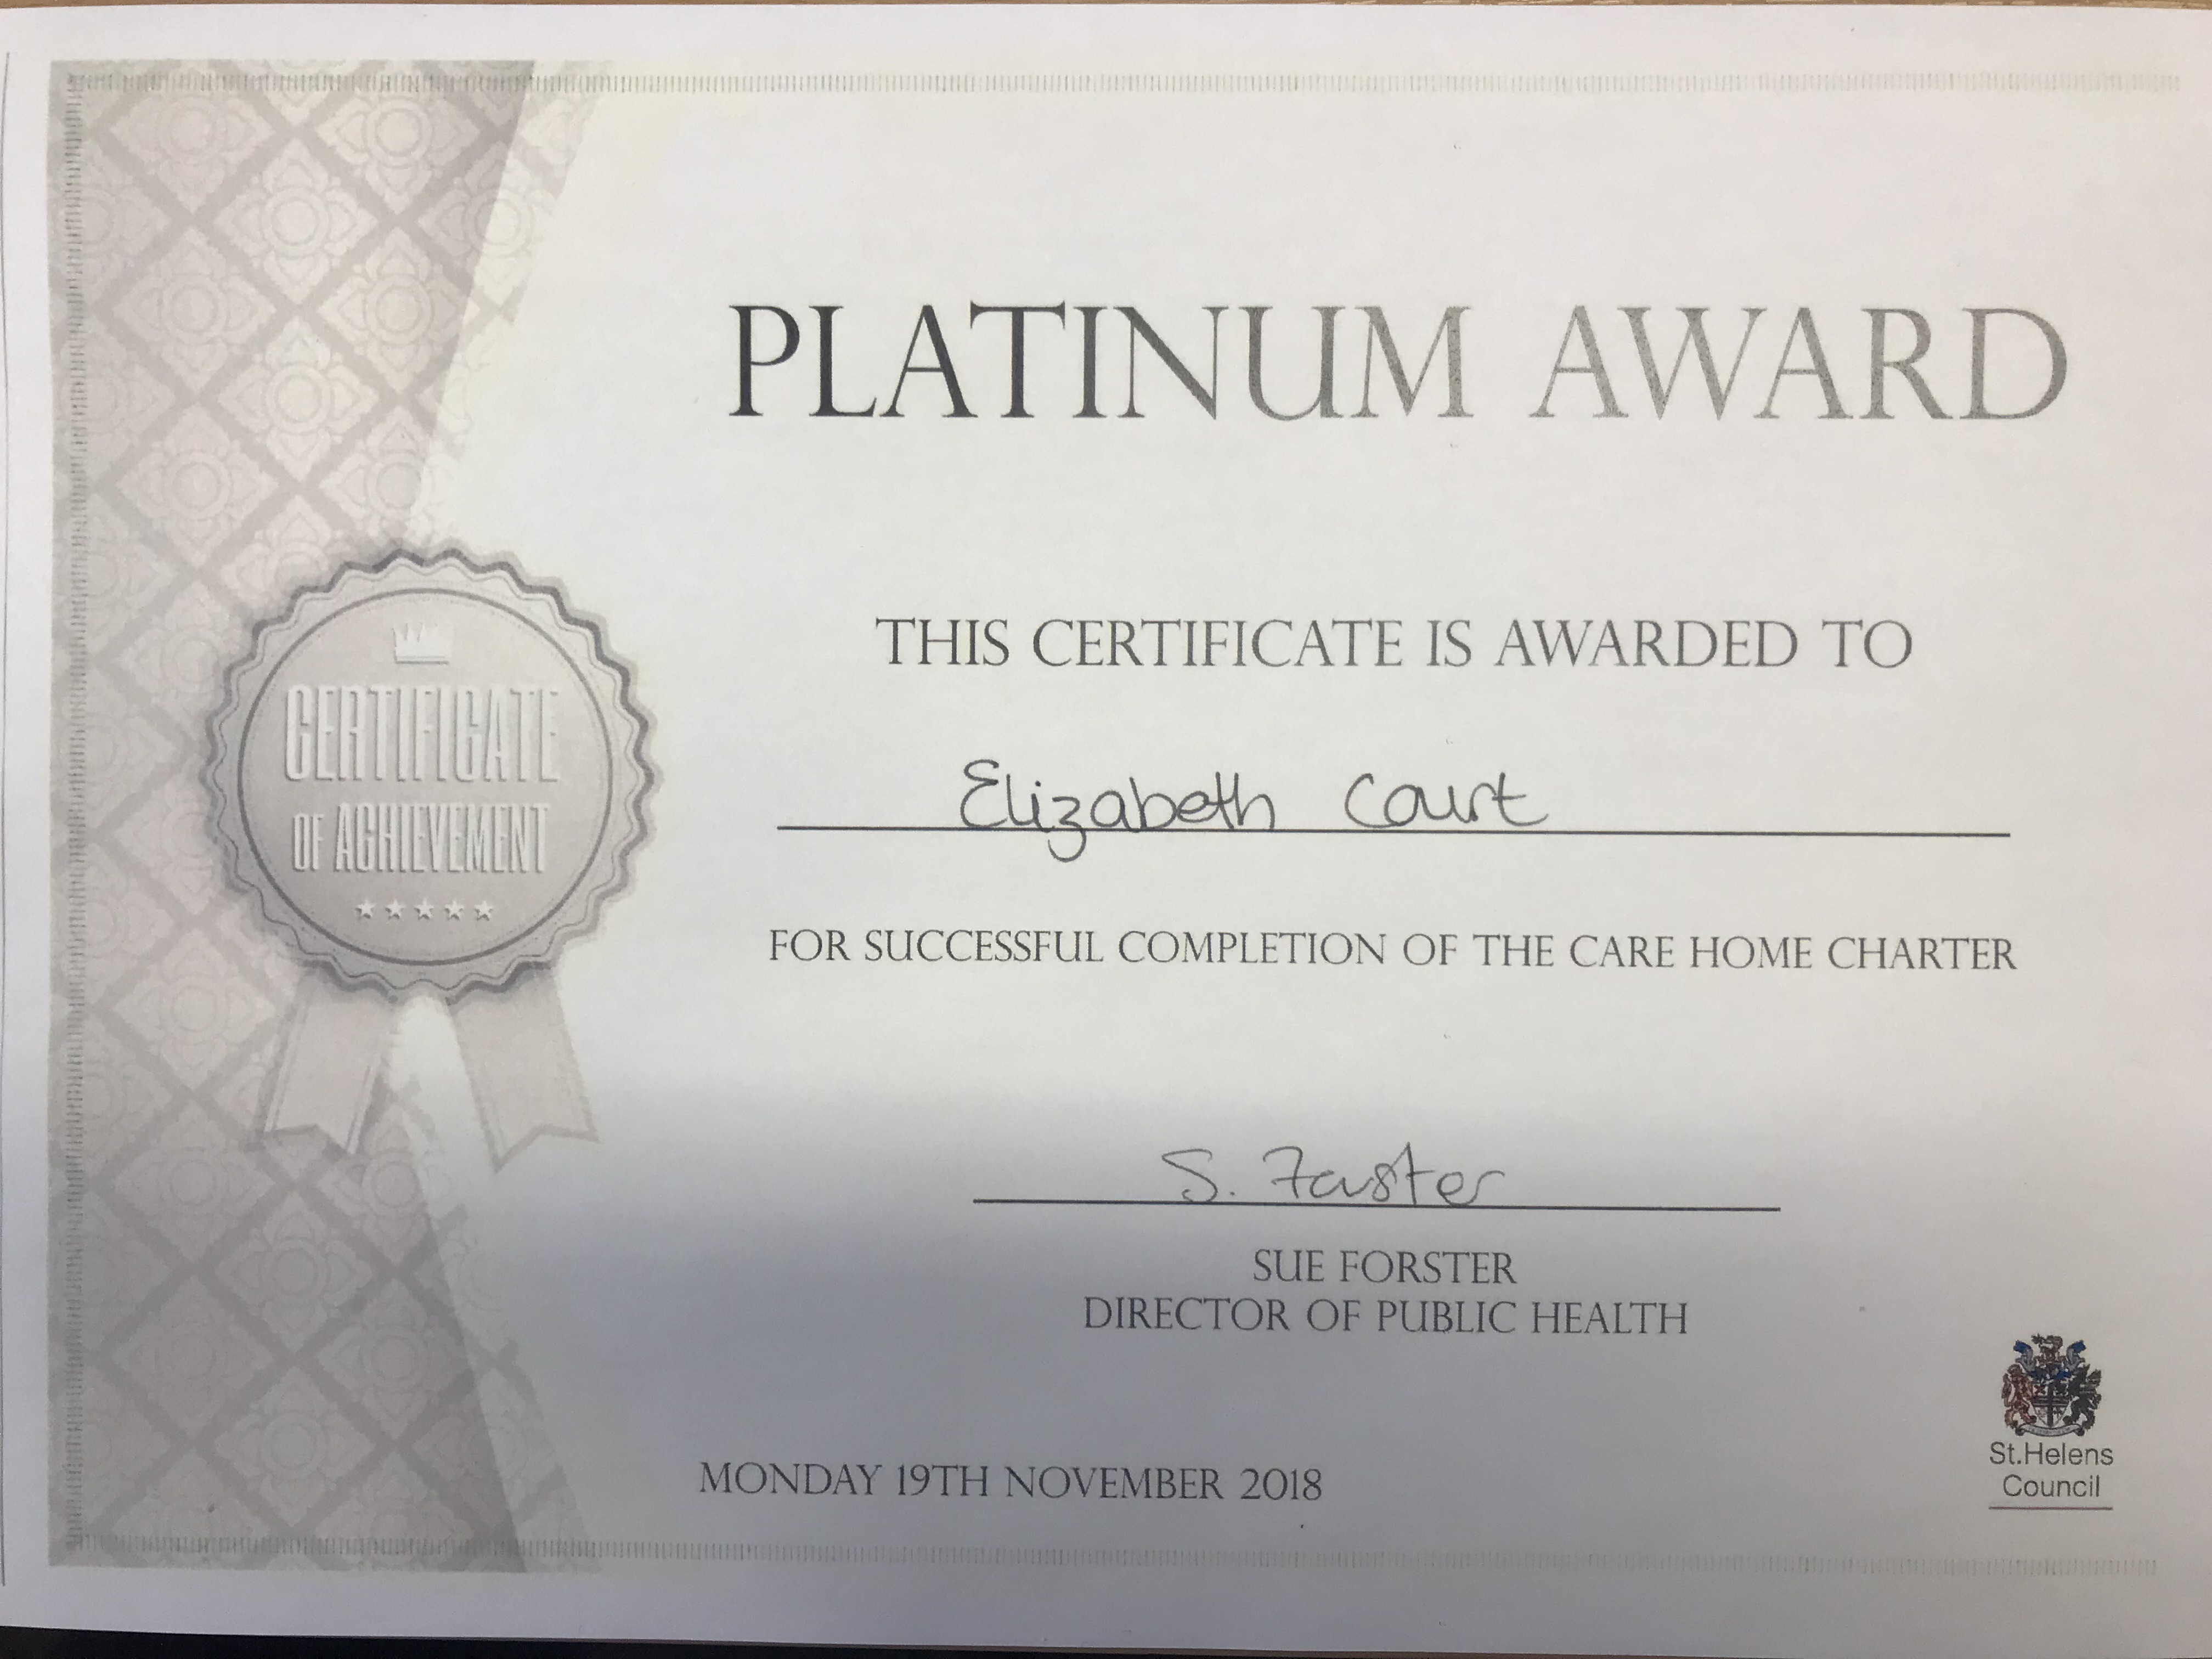 Platinum Award for Elizabeth Court Care Centre: Key Healthcare is dedicated to caring for elderly residents in safe. We have multiple dementia care homes including our care home middlesbrough, our care home St. Helen and care home saltburn. We excel in monitoring and improving care levels.